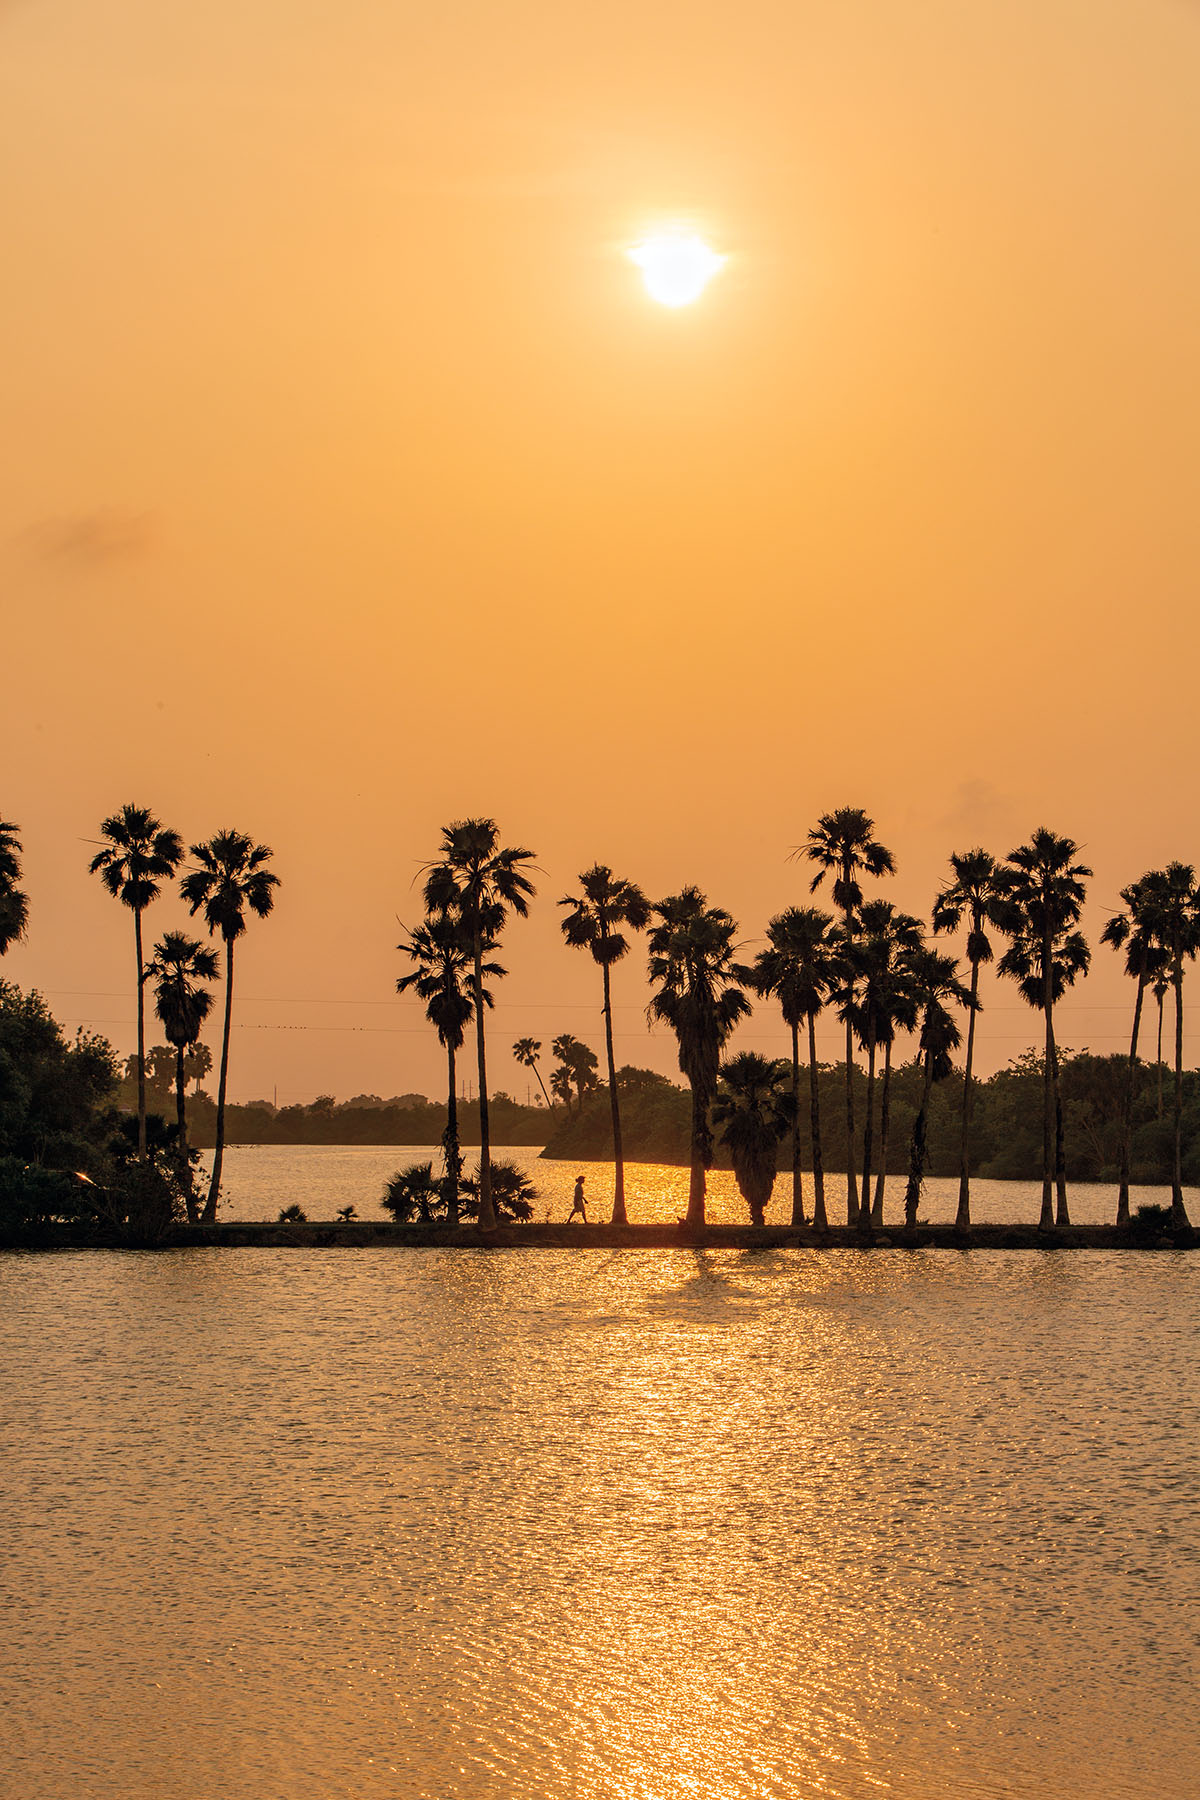 A golden sun over dark palm trees reflecting in clear water